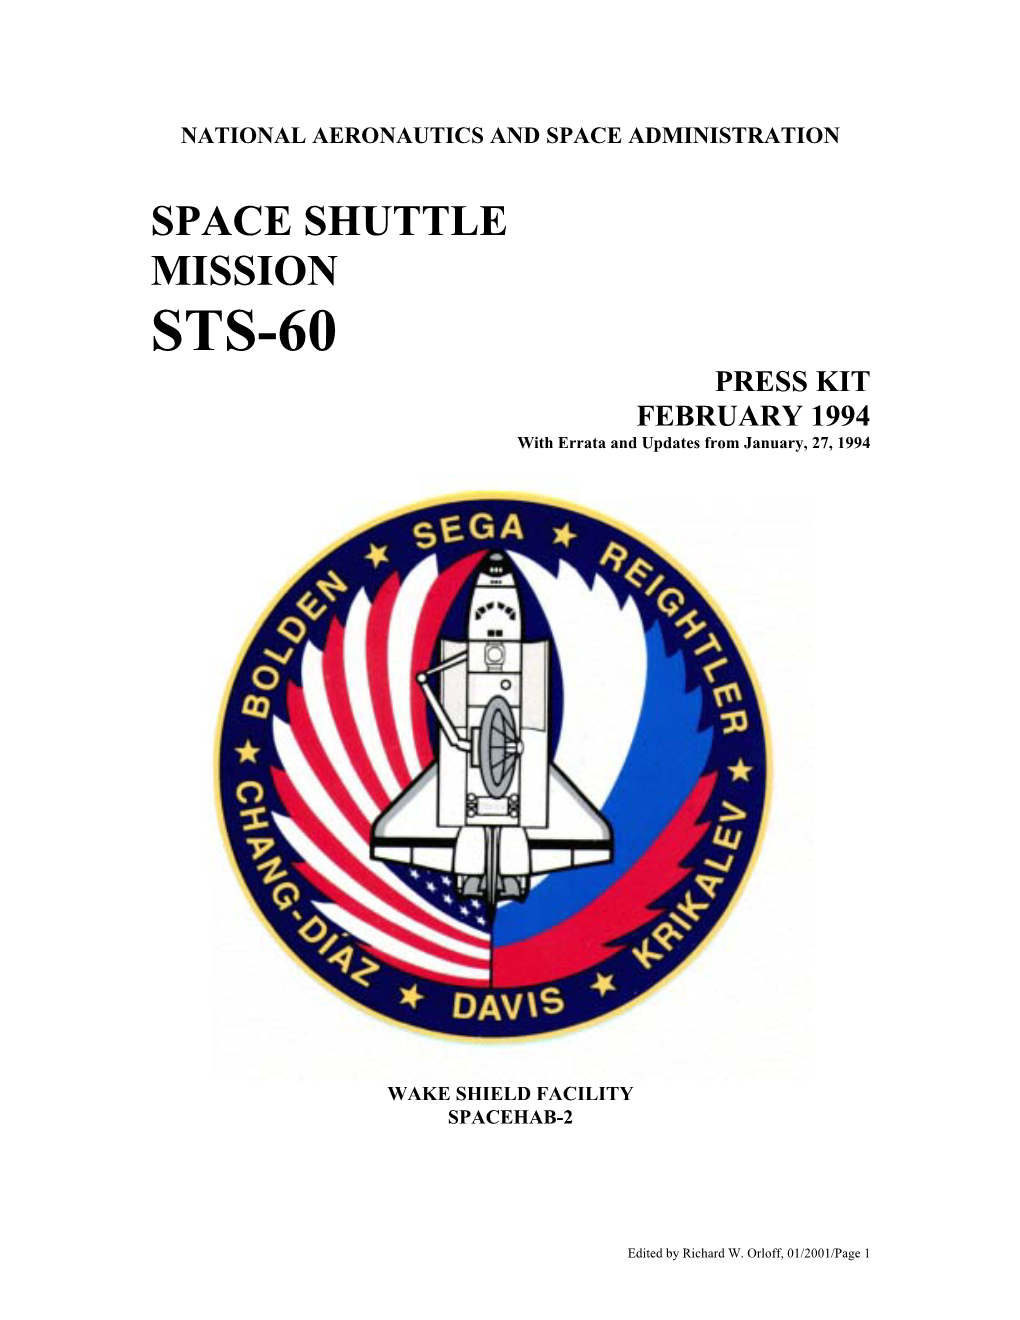 STS-60 PRESS KIT FEBRUARY 1994 with Errata and Updates from January, 27, 1994